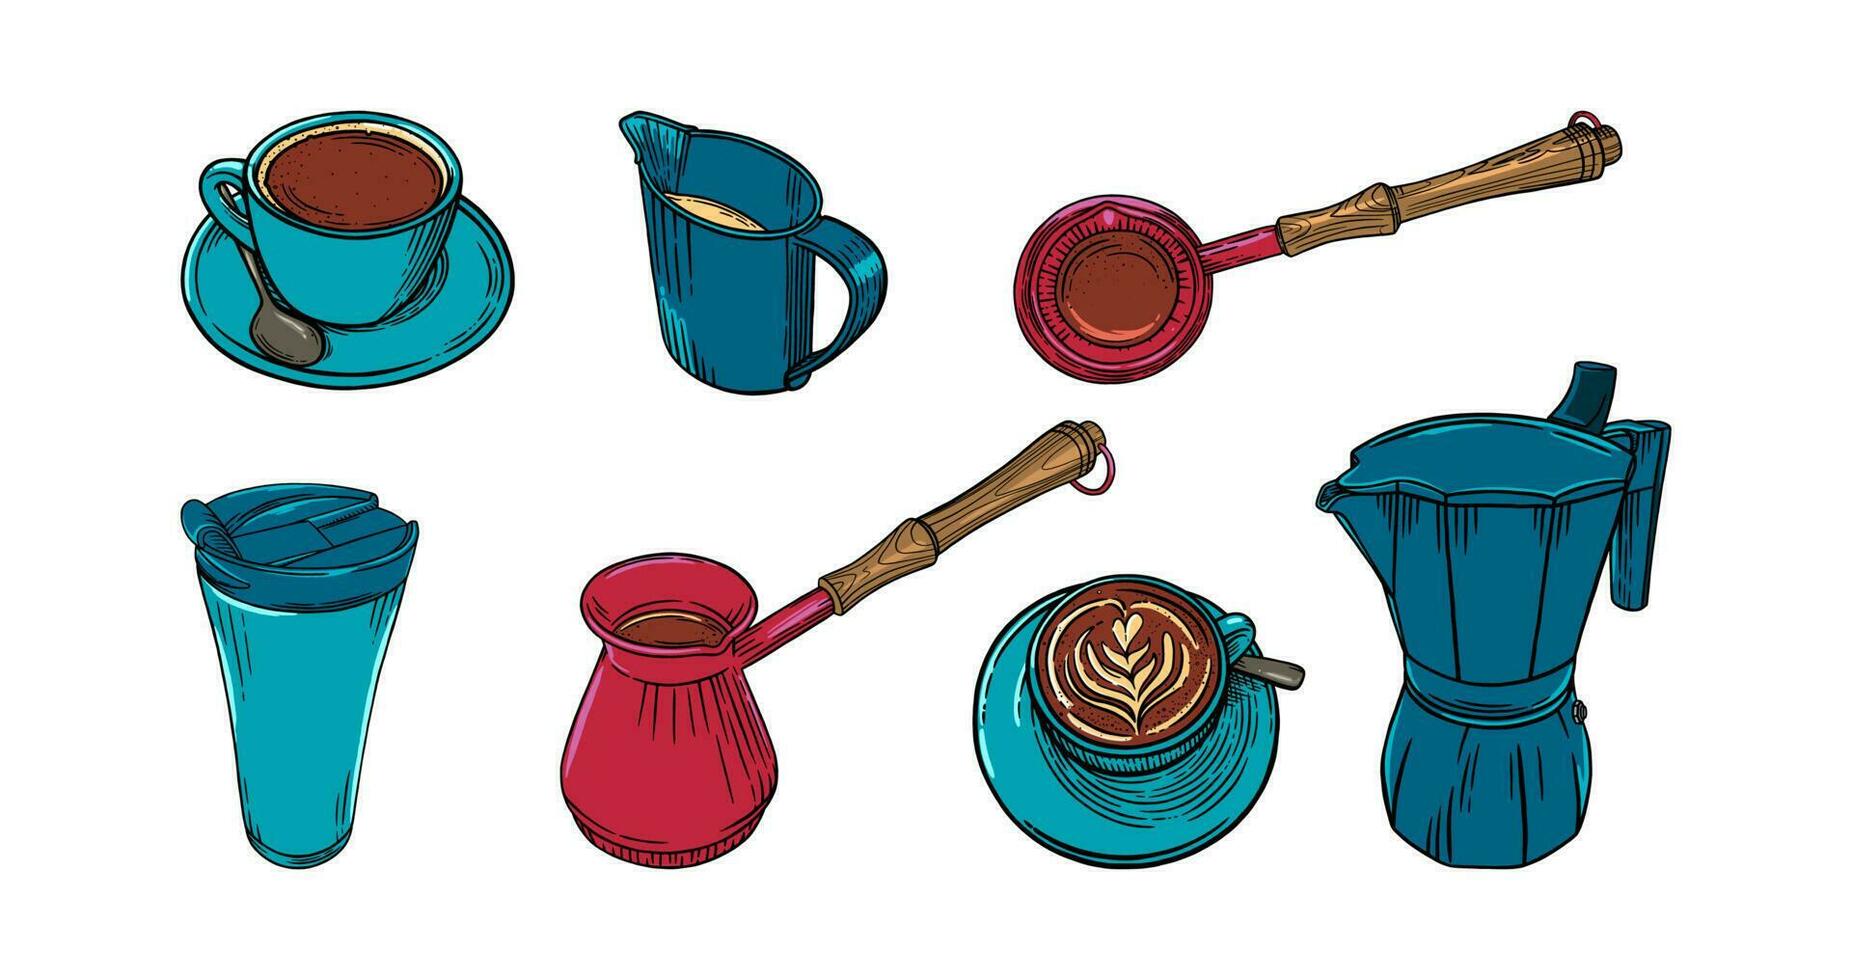 Coffee set wuth cups, pots and creamer. Big colored set of coffee accessoiries for cappuccino brewing. Vector illustration